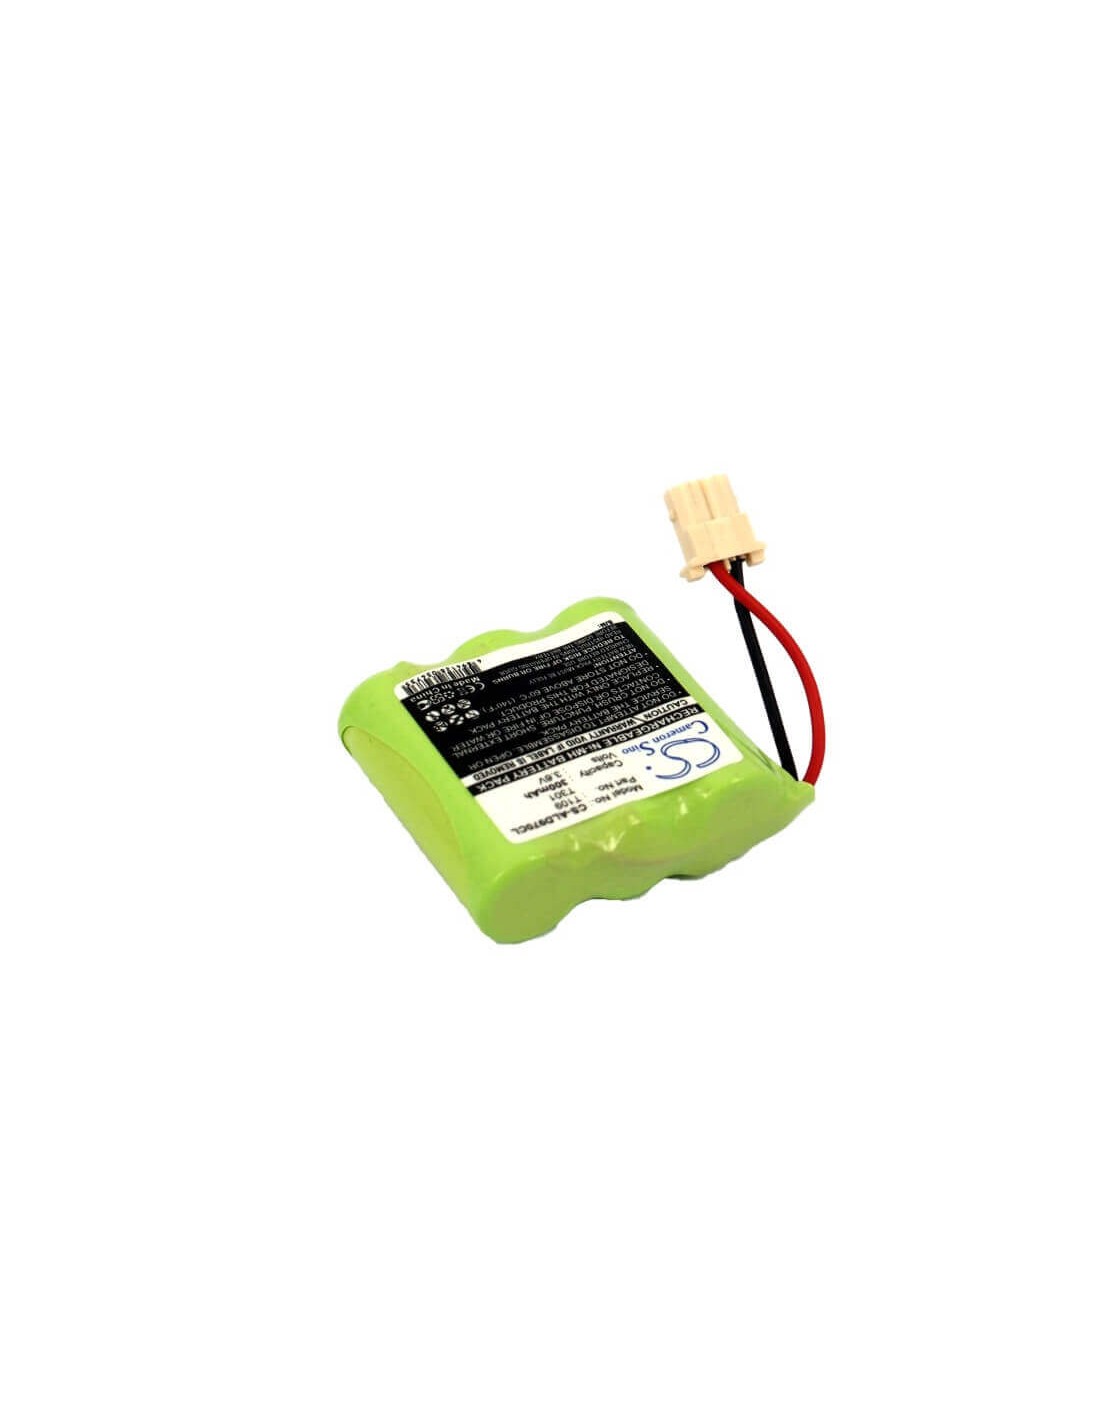 Battery for Texet, Tx-d7955a 3.6V, 300mAh - 1.08Wh